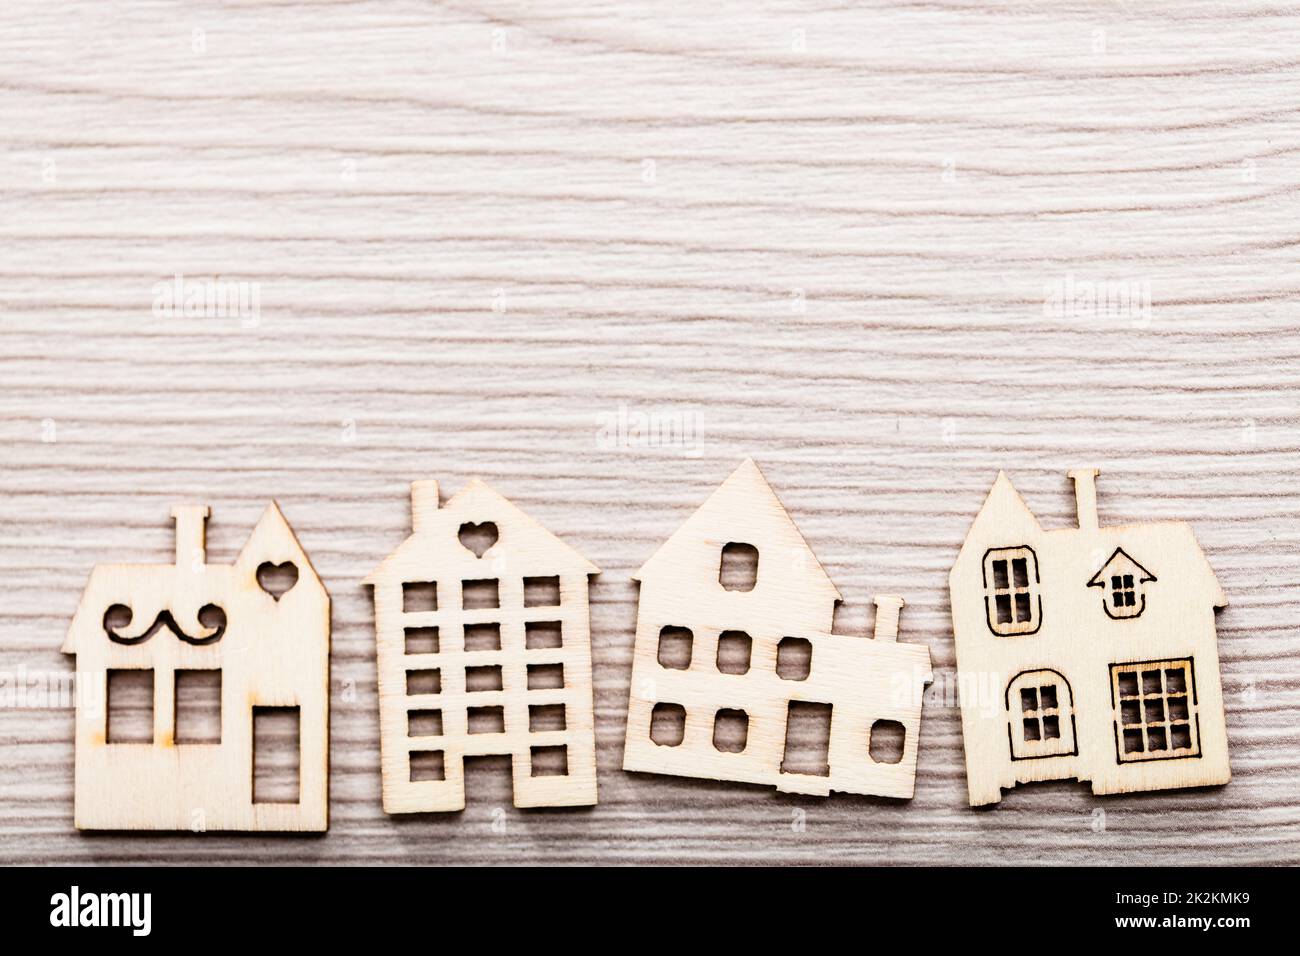 Little wooden house cutouts of different designs forming a border Stock Photo